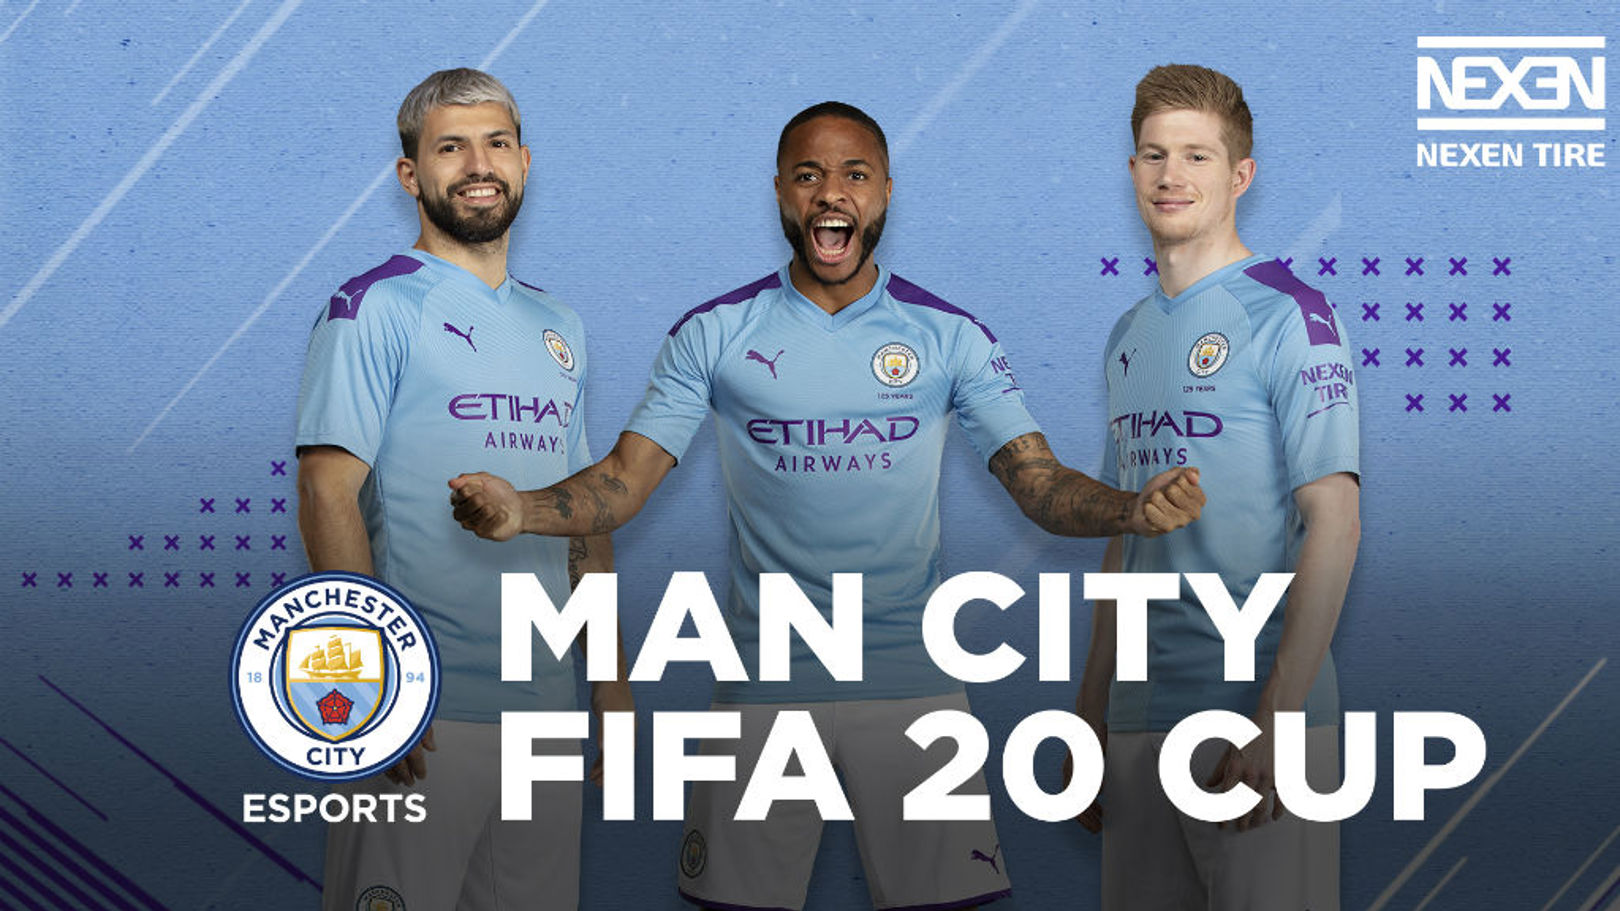 Man City FIFA 20 Cup open for registration in Singapore